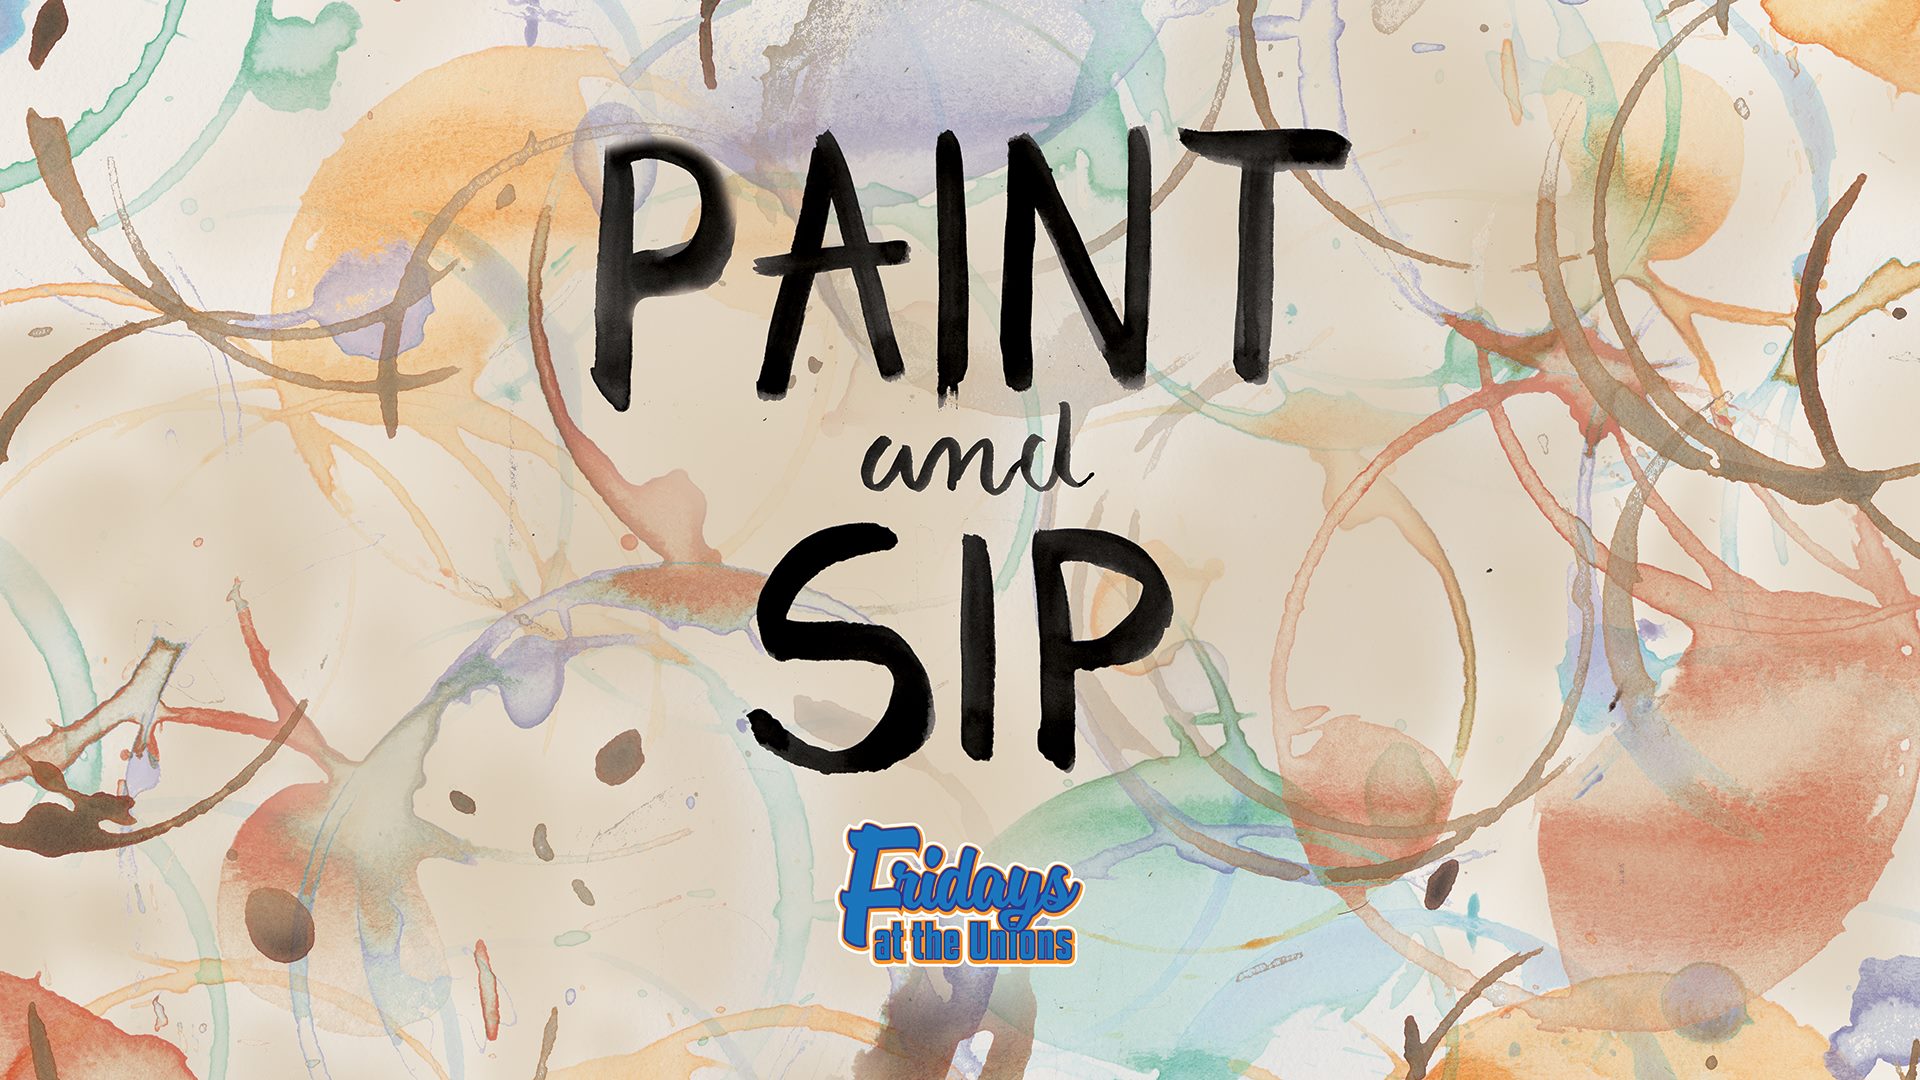 If you've ever wanted to try a paint party, here's your chance!